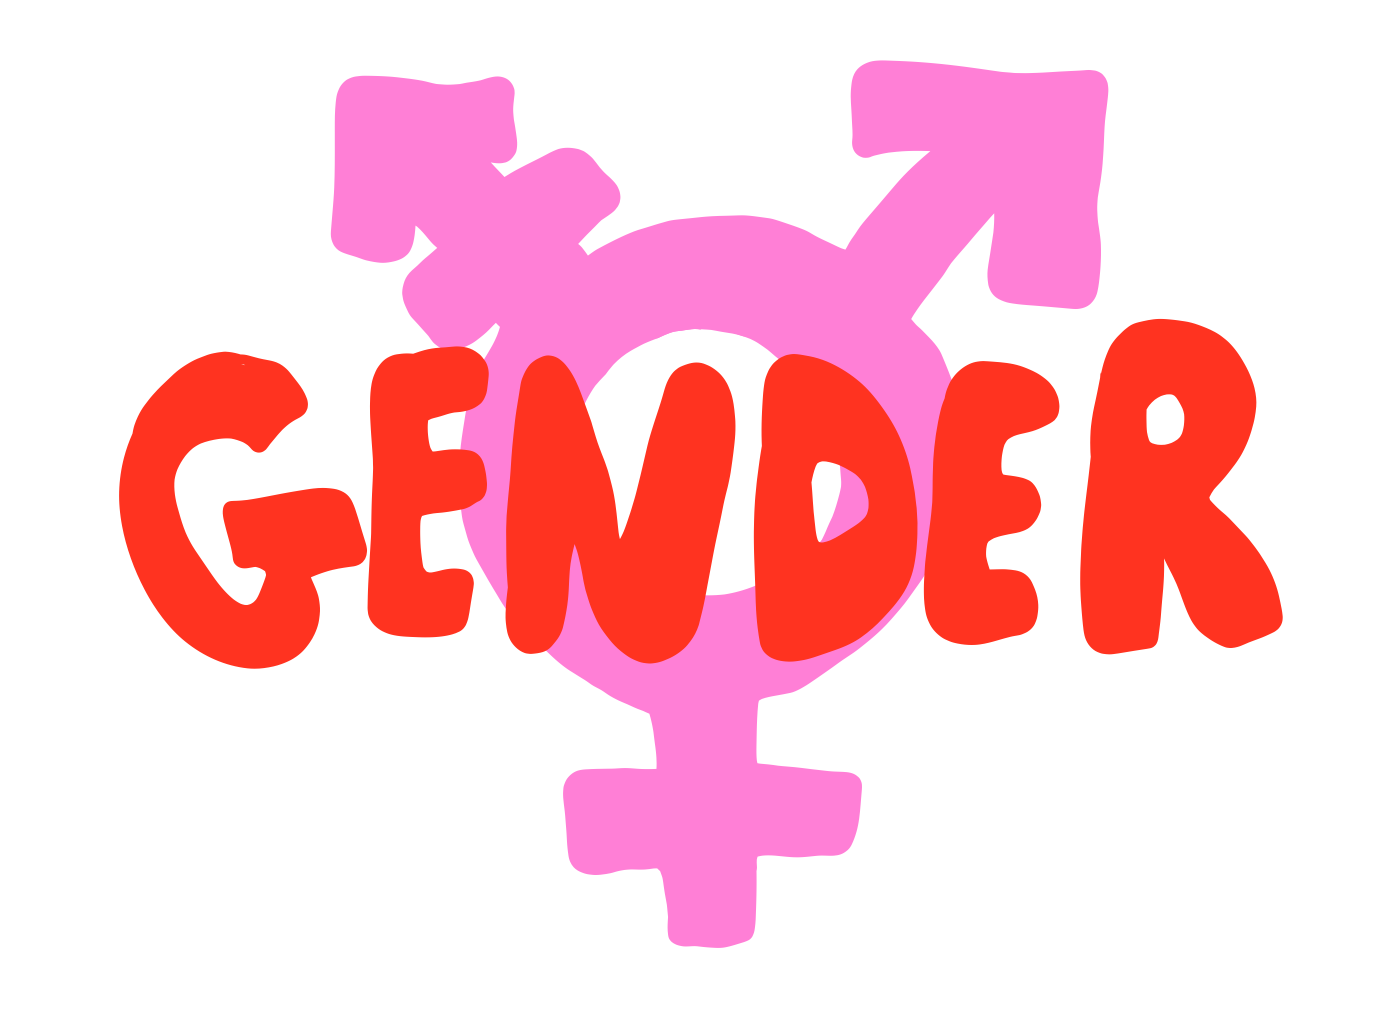 Post tagged in Gender